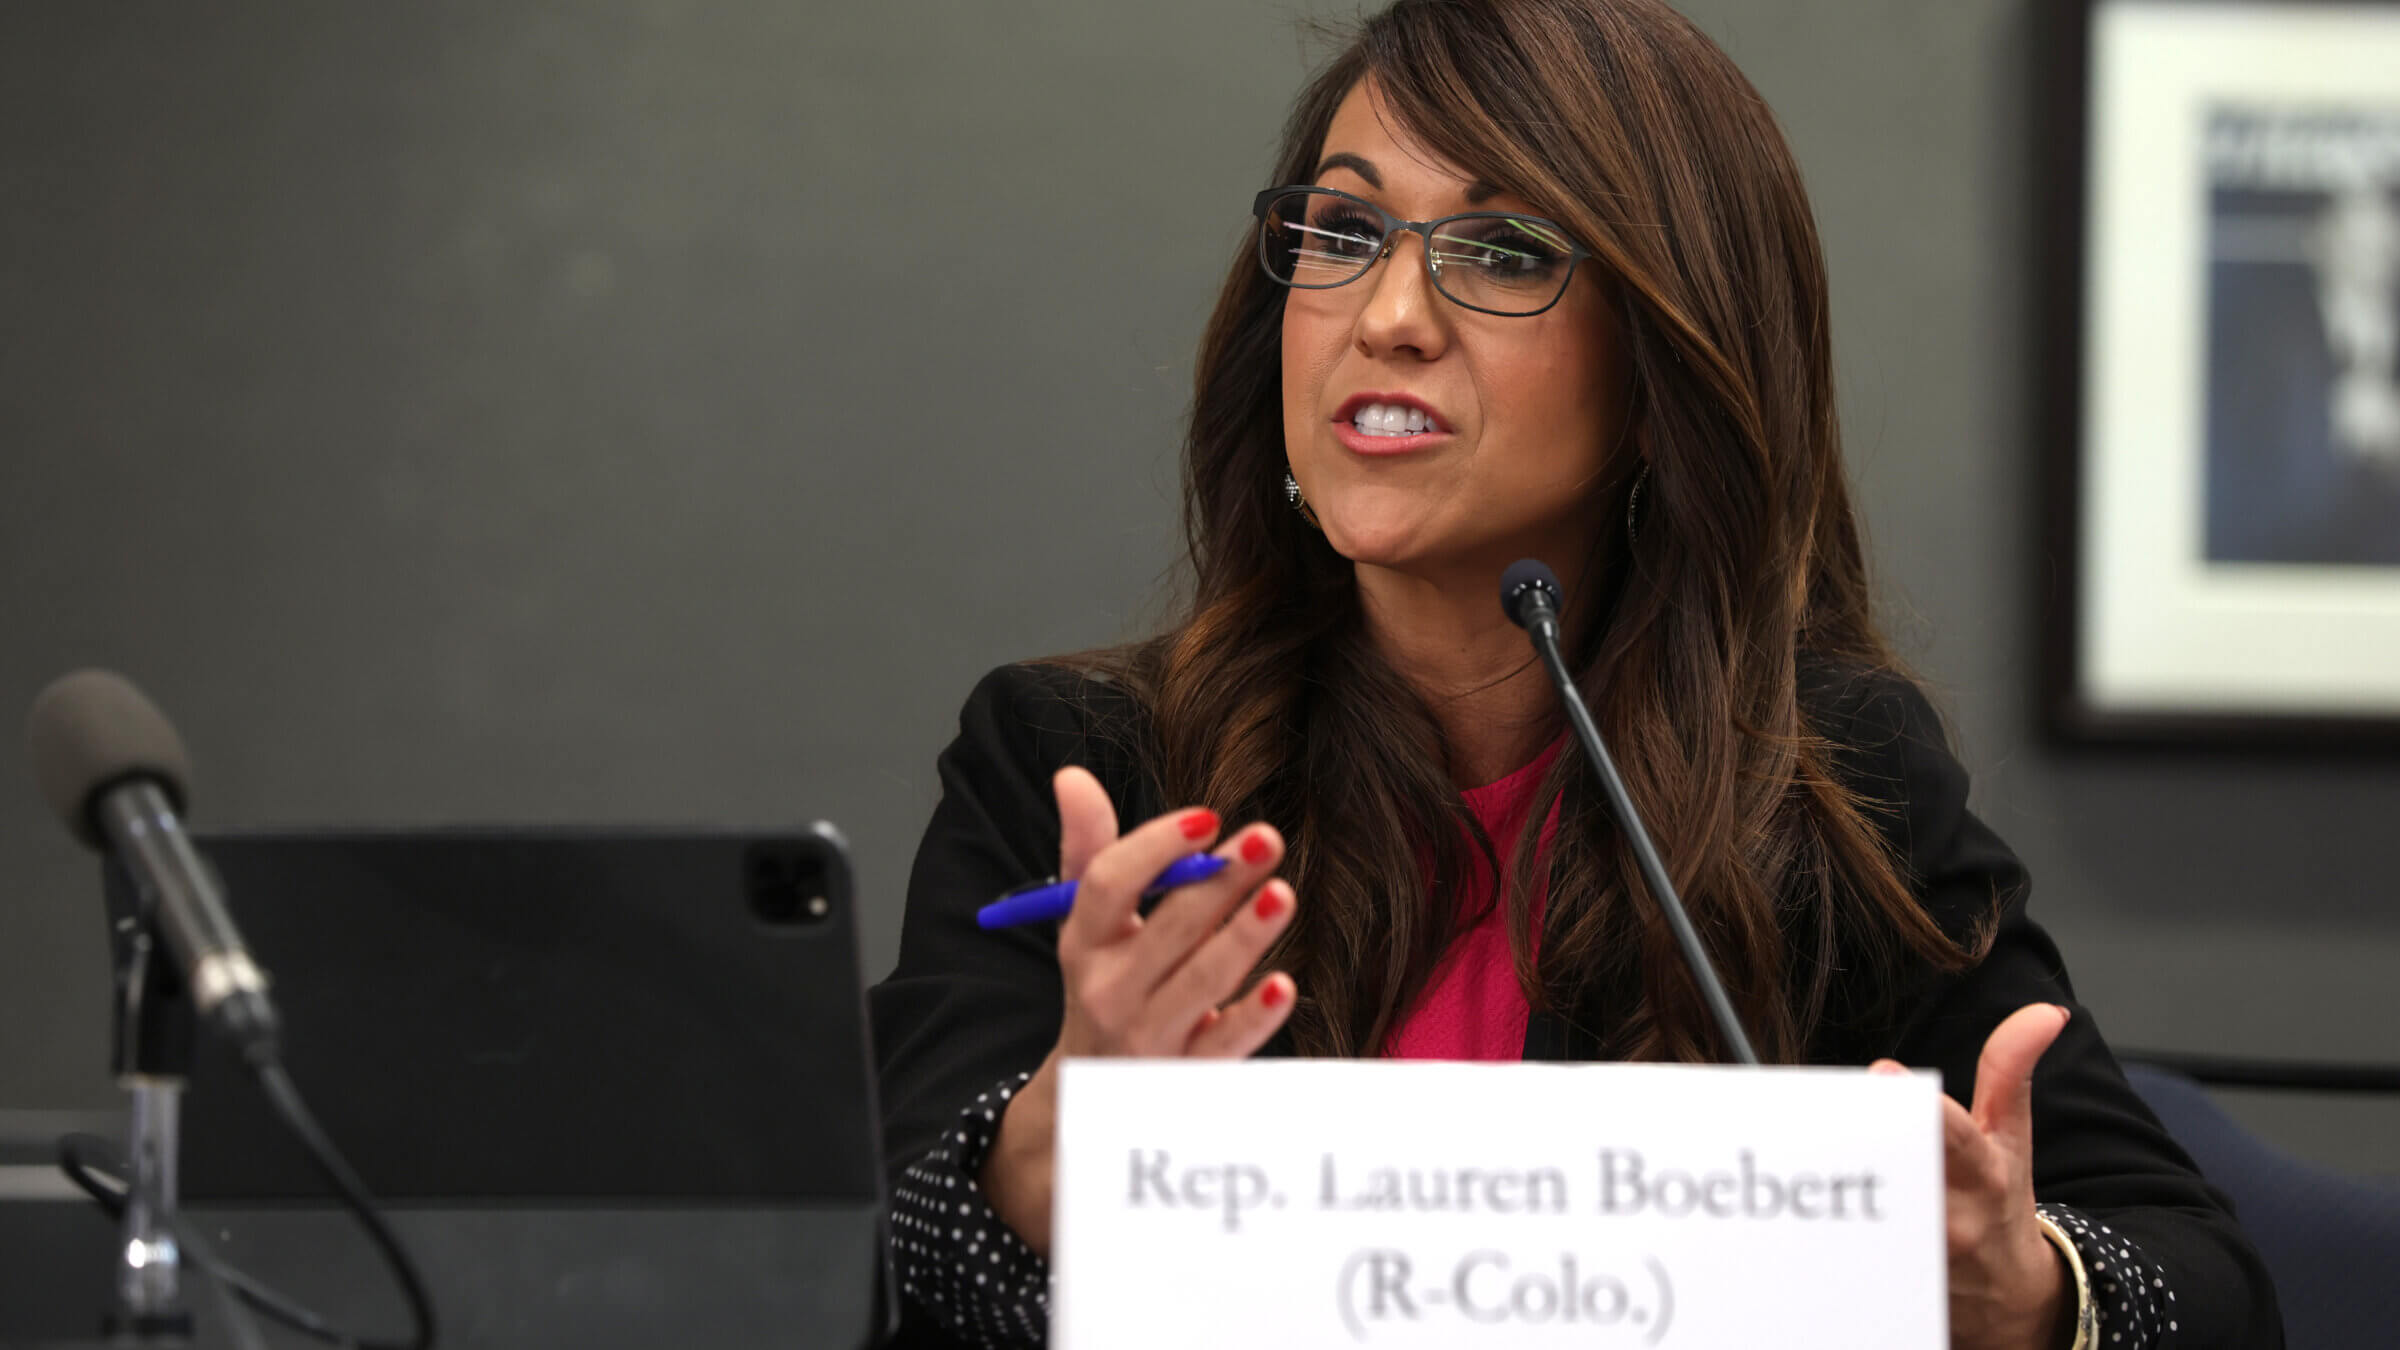 U.S. Rep. Lauren Boebert, R-Colo., speaks during a hearing at the Heritage Foundation June 21, 2022, in Washington, D.C.